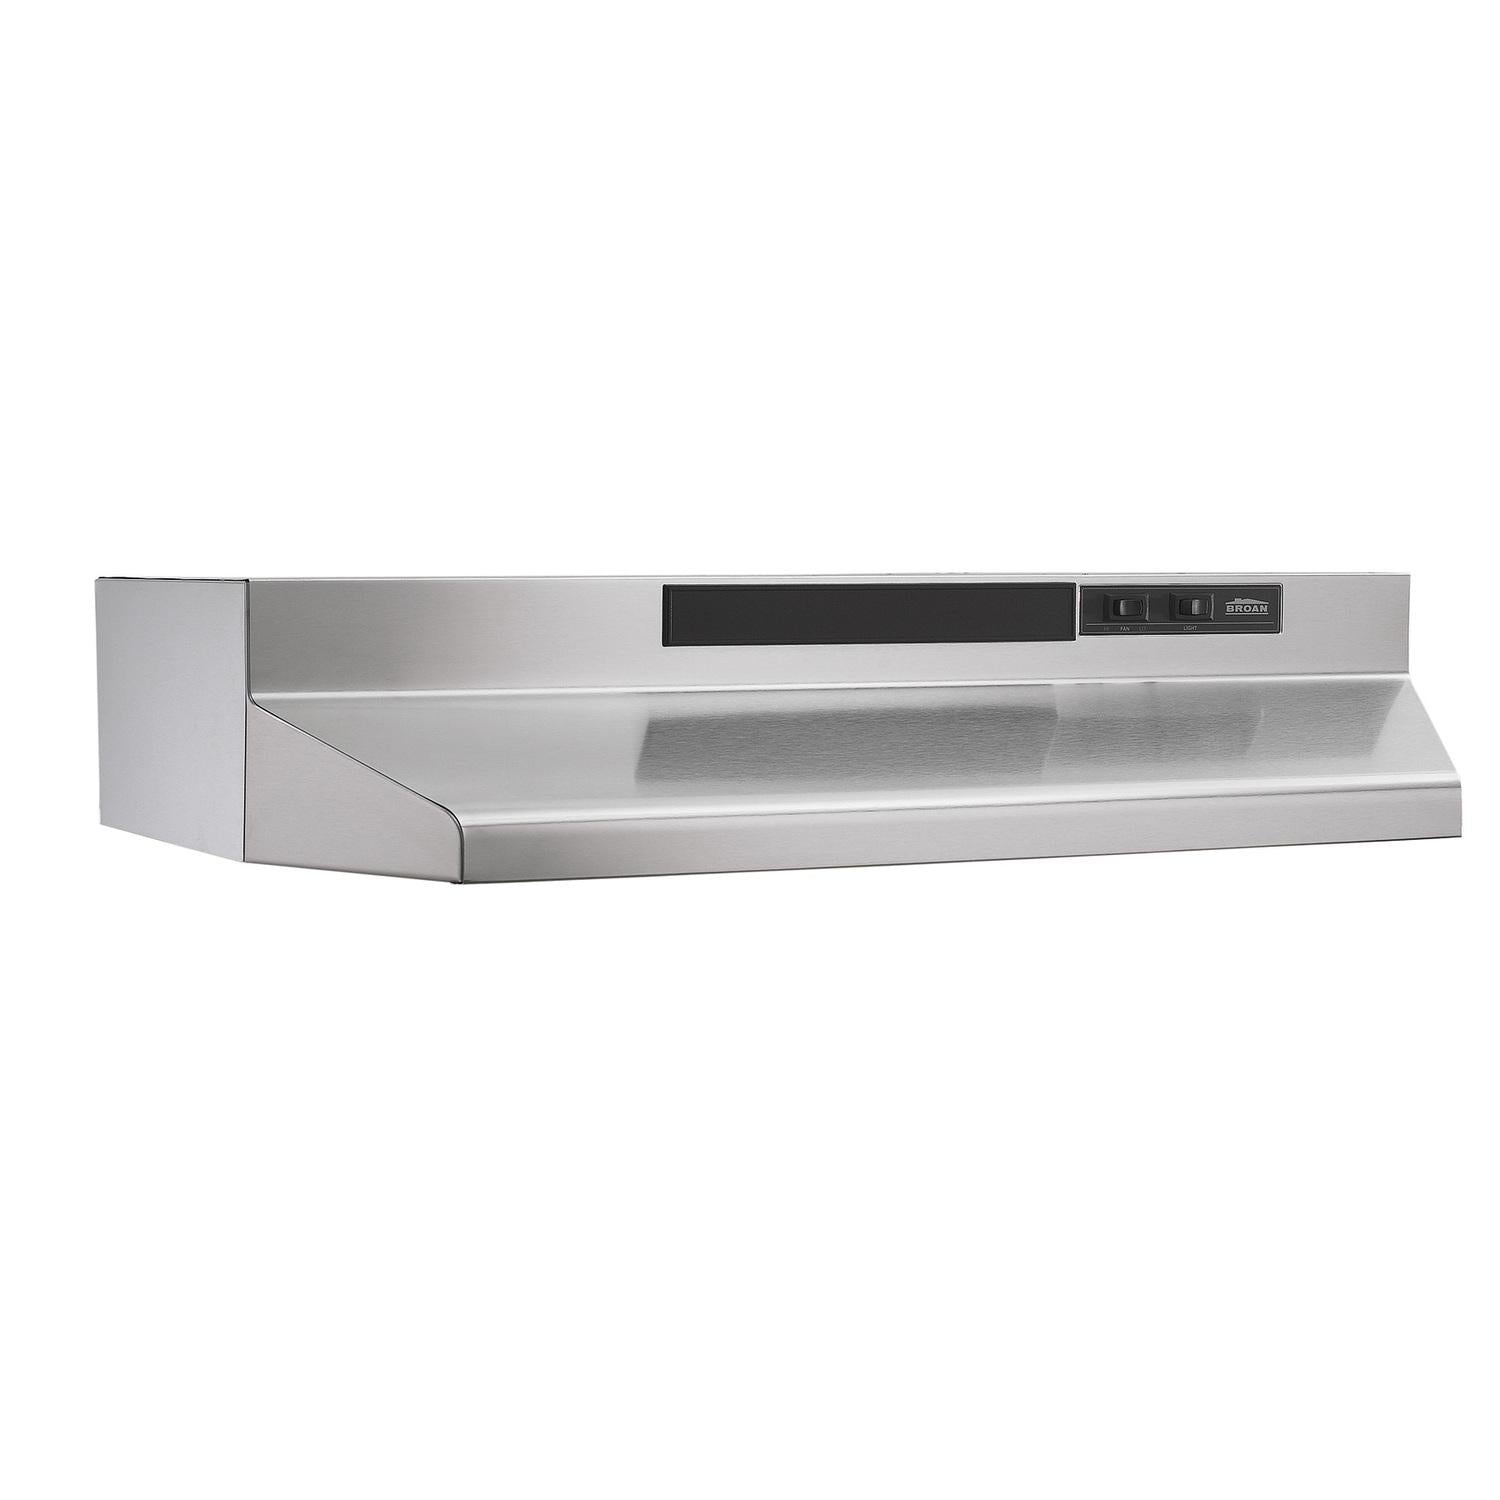 Broan® 30-Inch Convertible Under-Cabinet Range Hood, w/ Easy Install System 260 Max Blower CFM, Stainless Steel